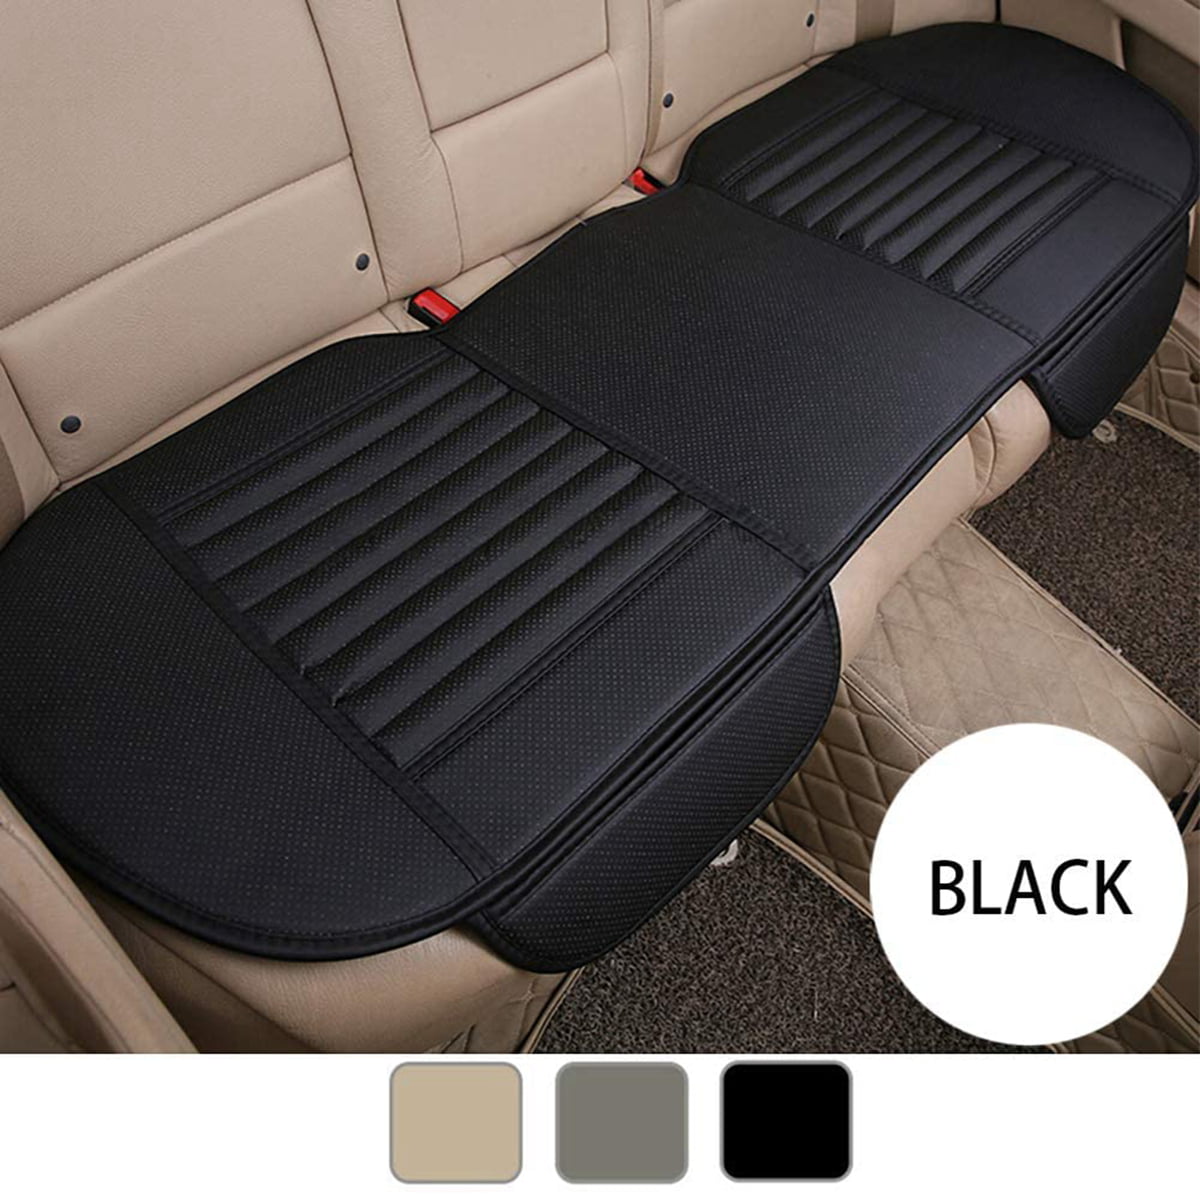 Portable Rear Bench Cushion Mat Red Seam PU Leather Back Cover Car Seat I5X4 